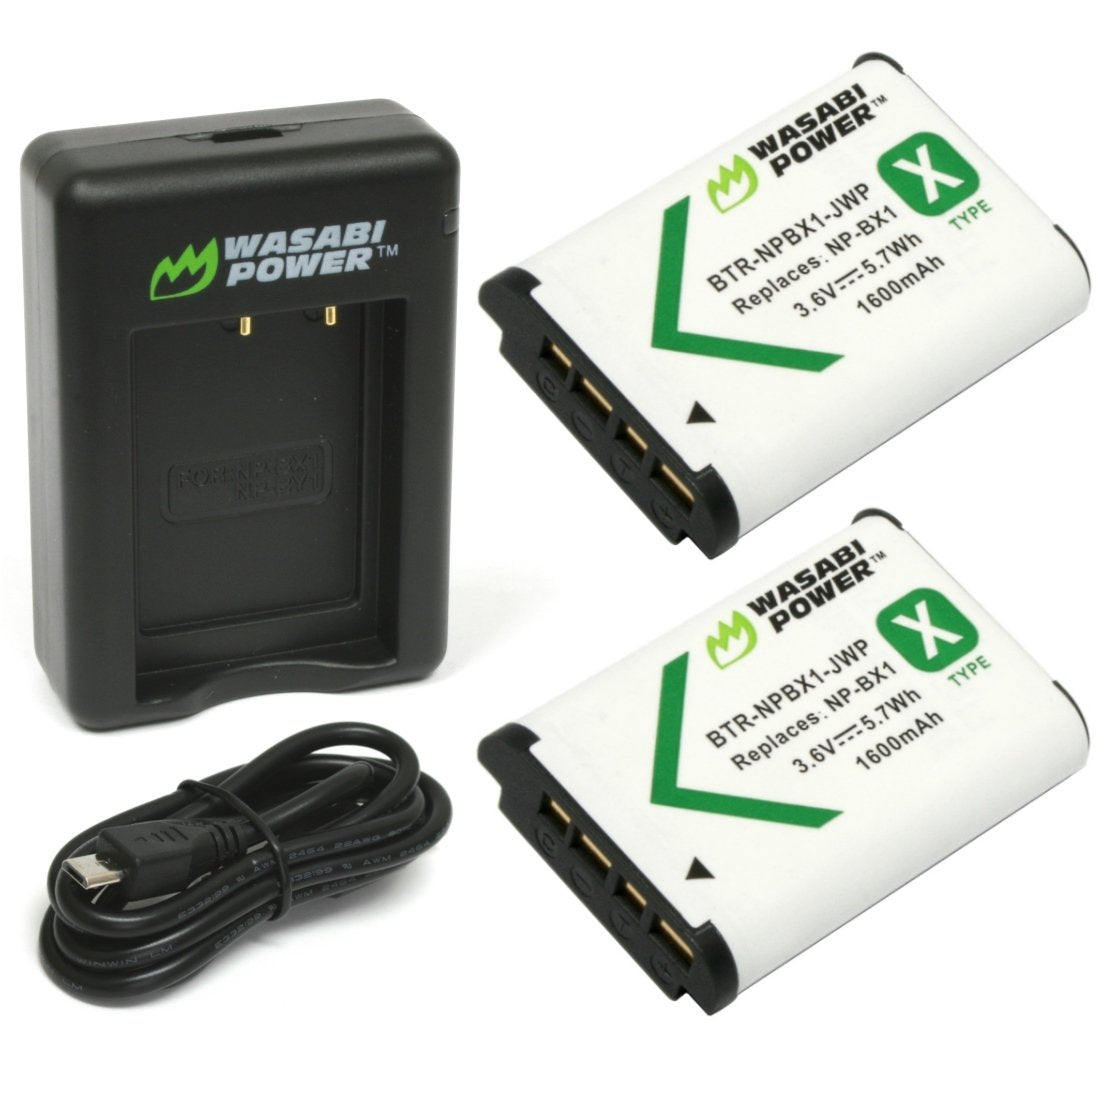 Sony NP-BX1, NP-BX1/M8 Battery (2-Pack) and Dual Charger by